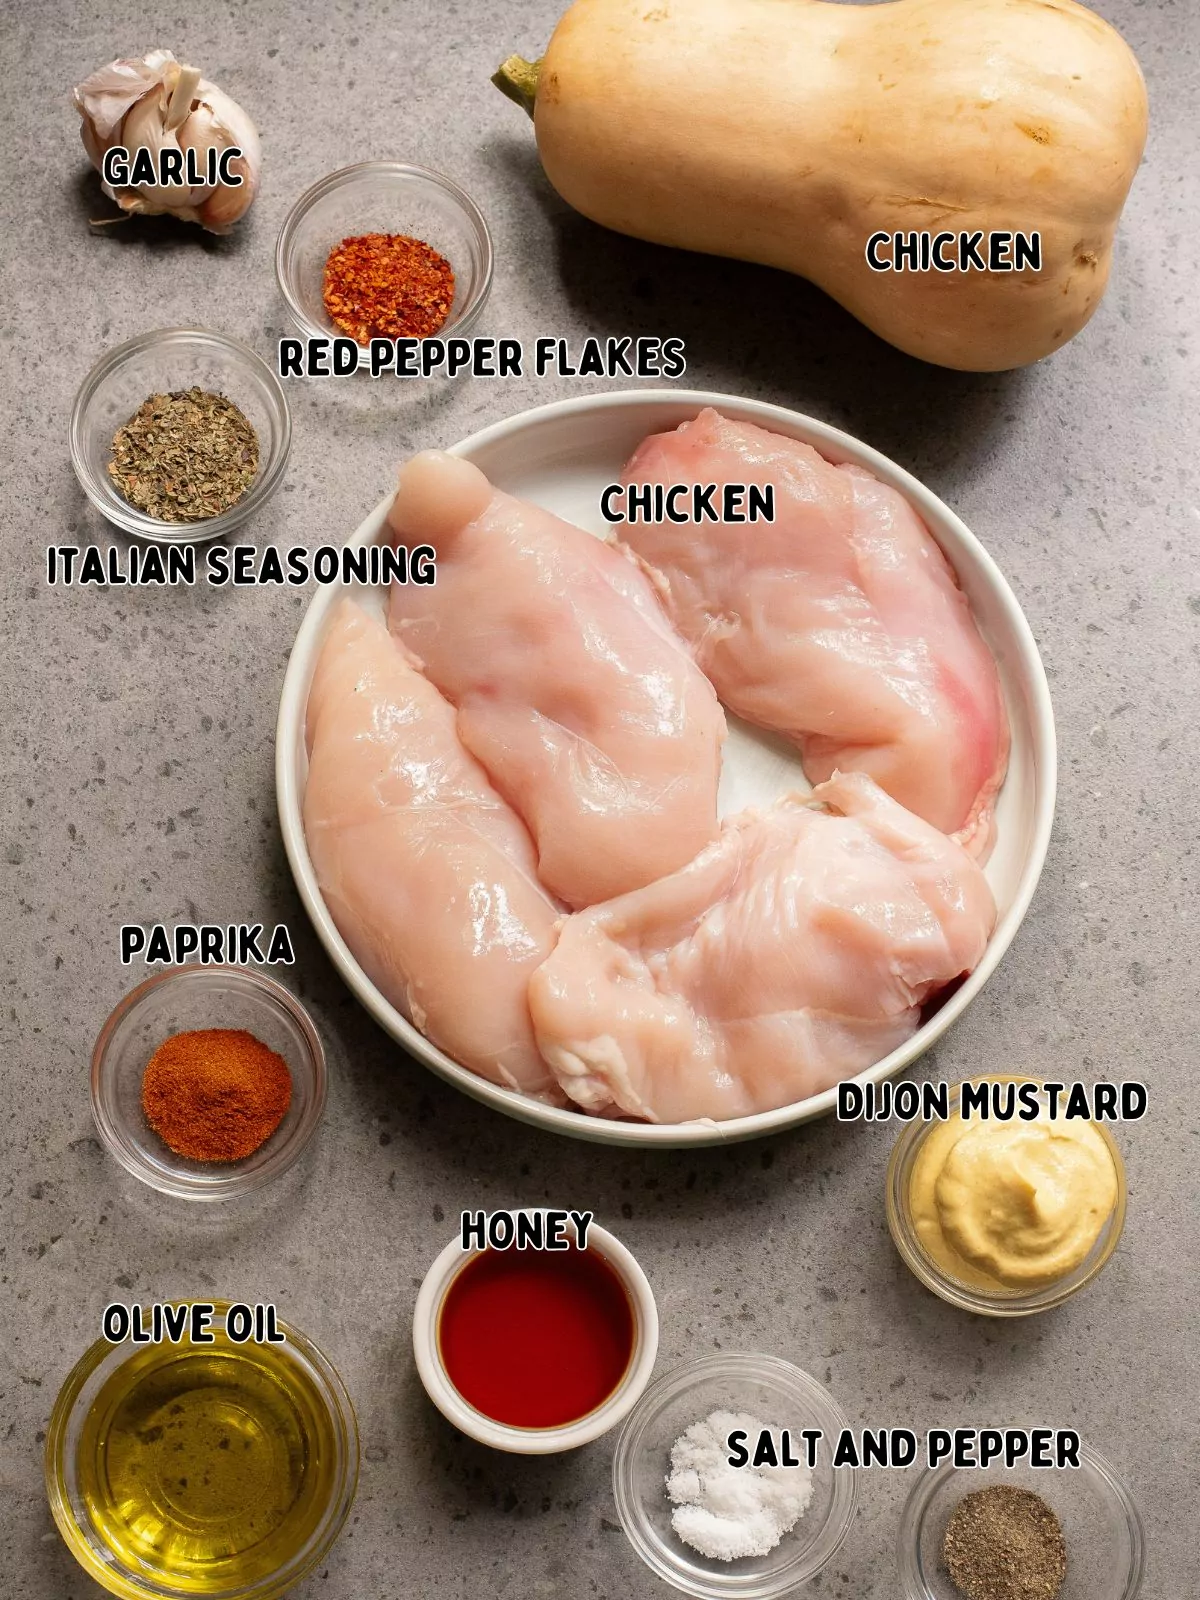 ingredients of chicken, butternut squash, mustard, olive oil and more.